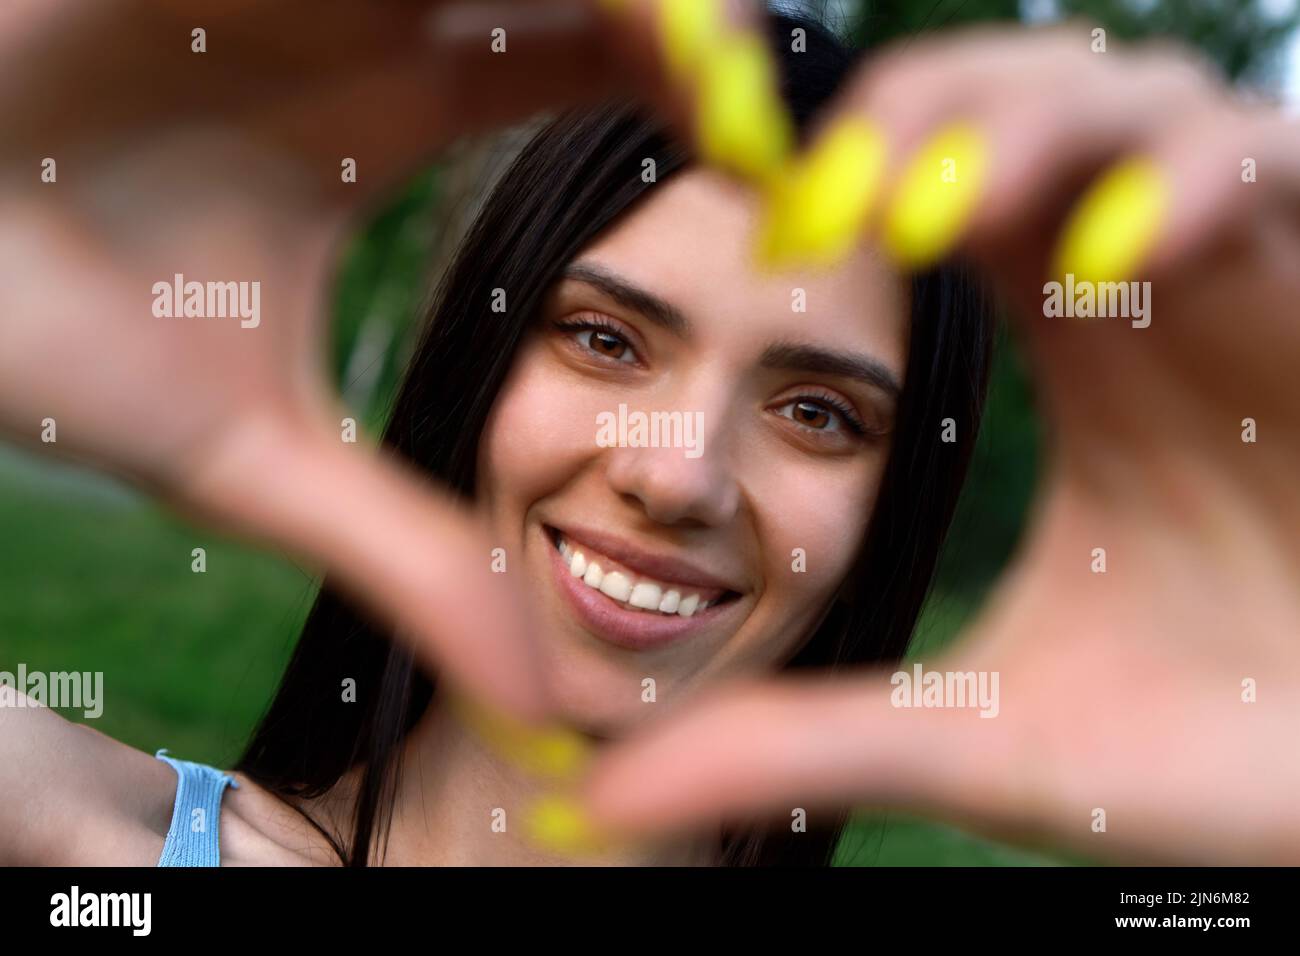 Beautiful Girl with smiling and making heart with her hands Stock Photo